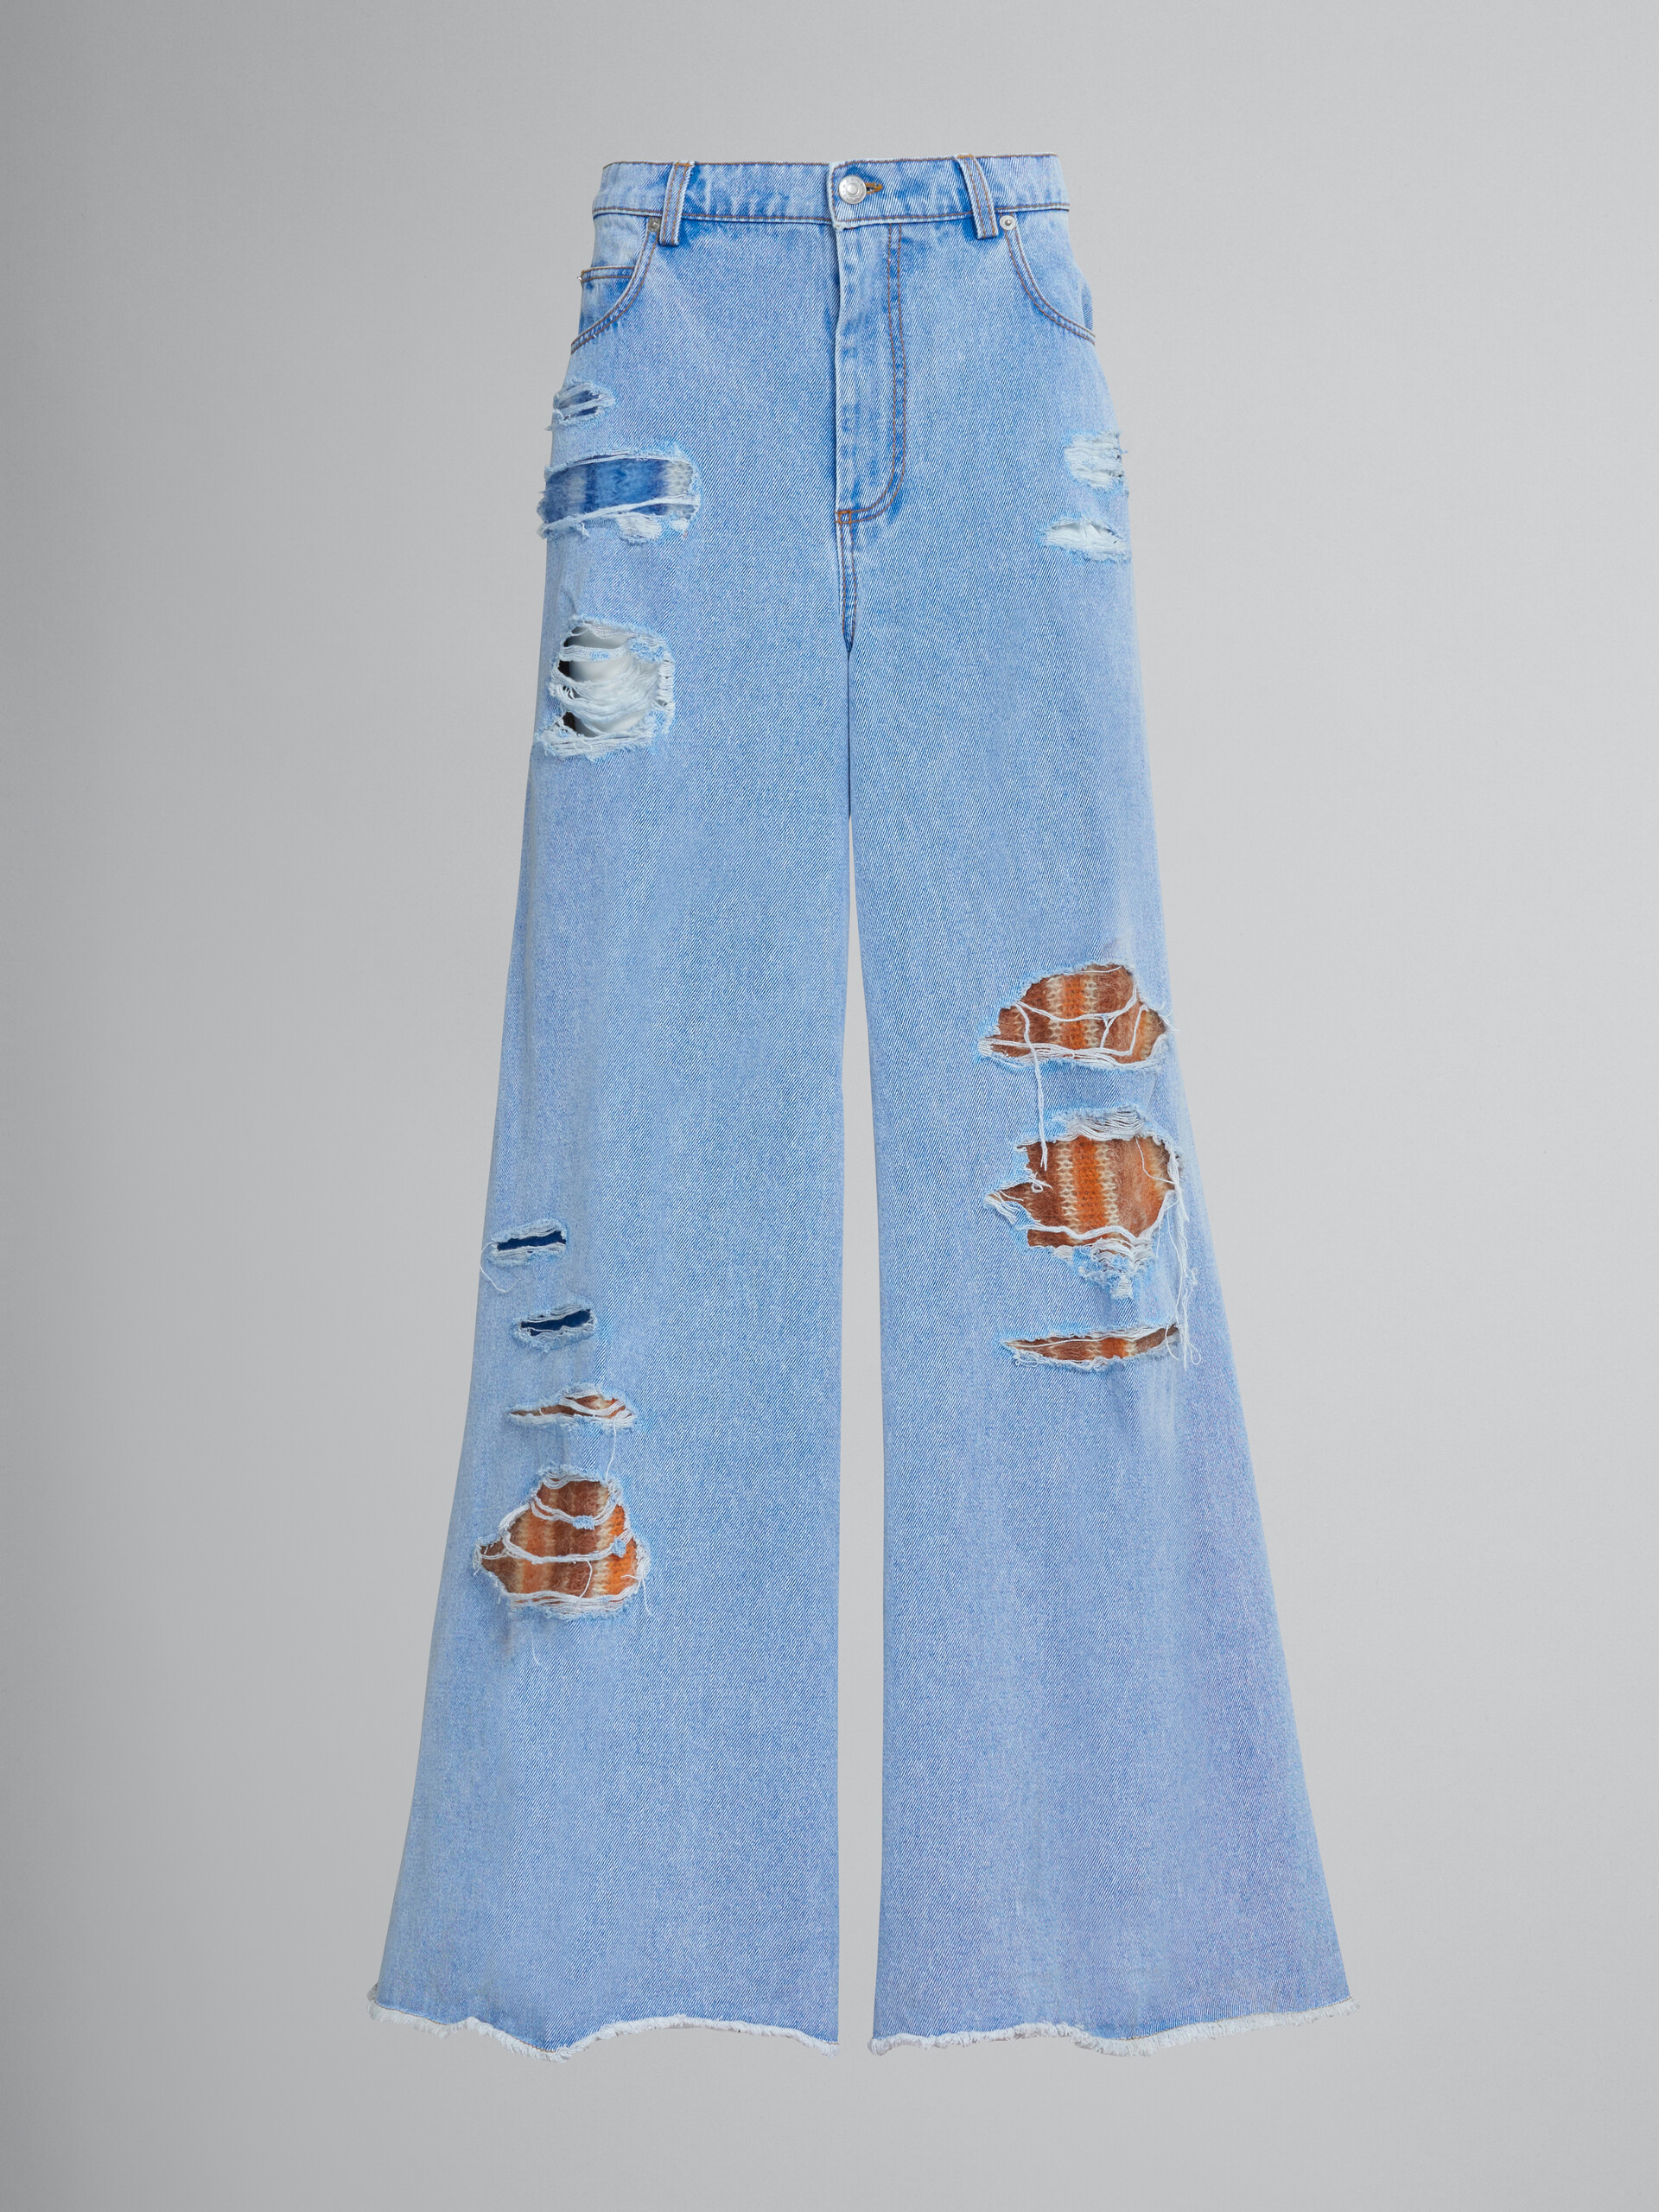 Flared trousers in light blue denim and mohair - Pants - Image 1